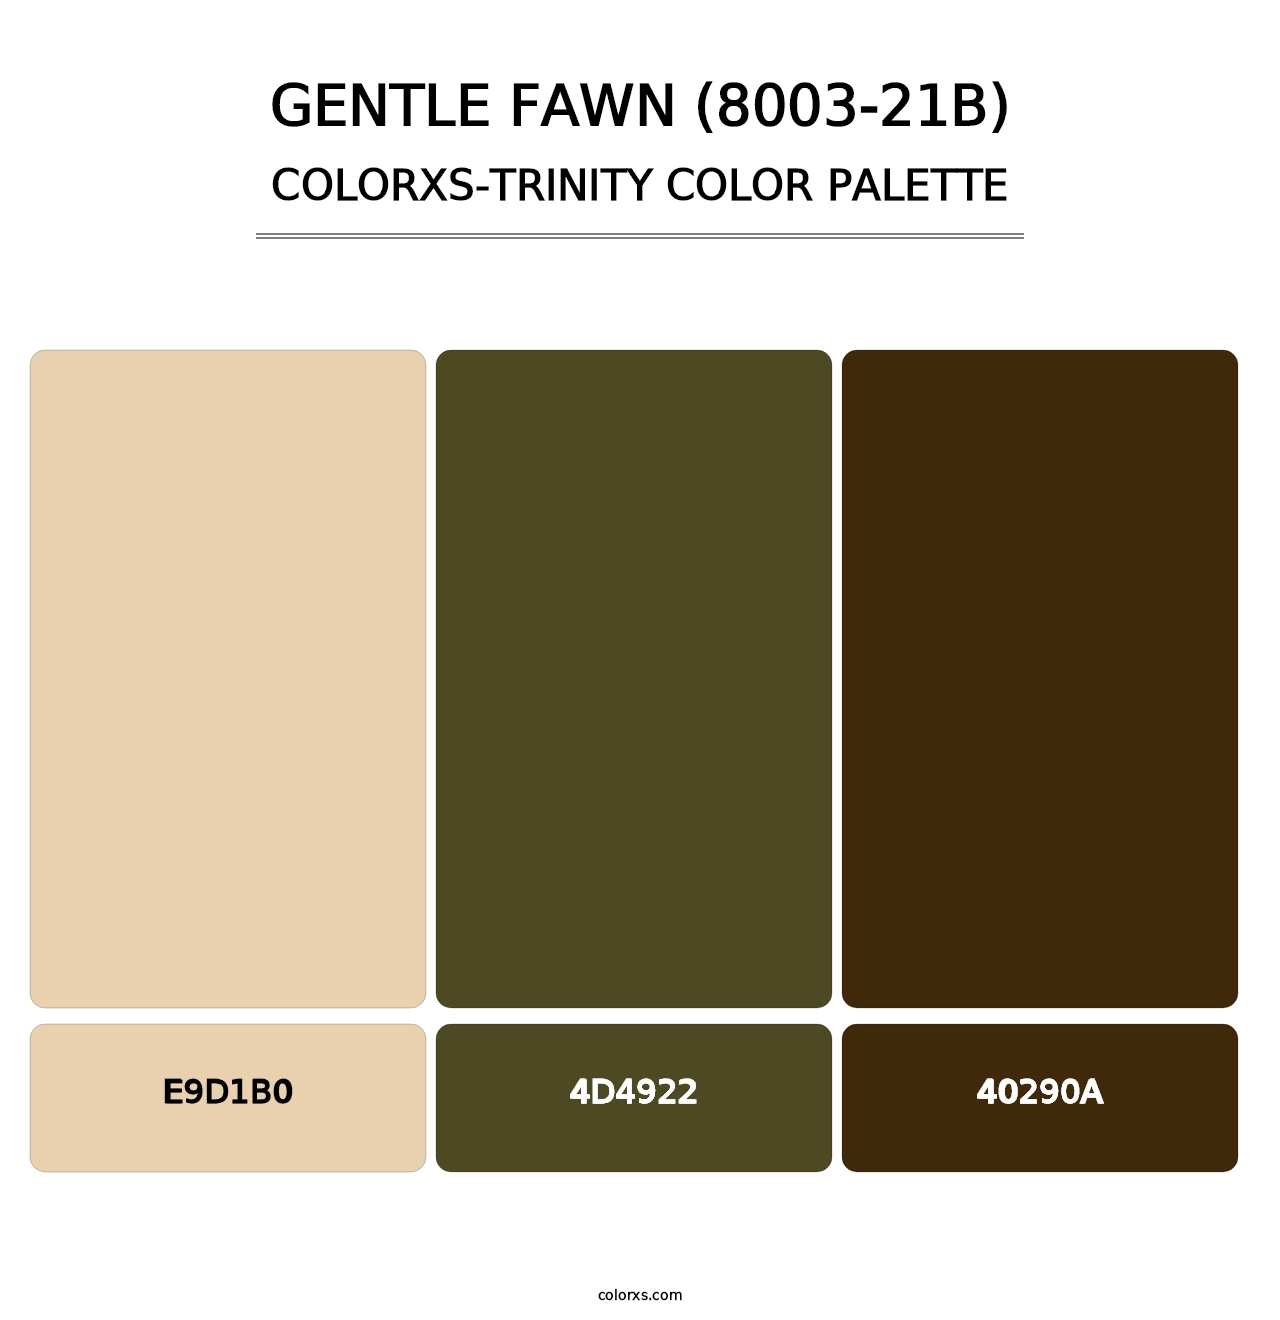 Gentle Fawn (8003-21B) - Colorxs Trinity Palette